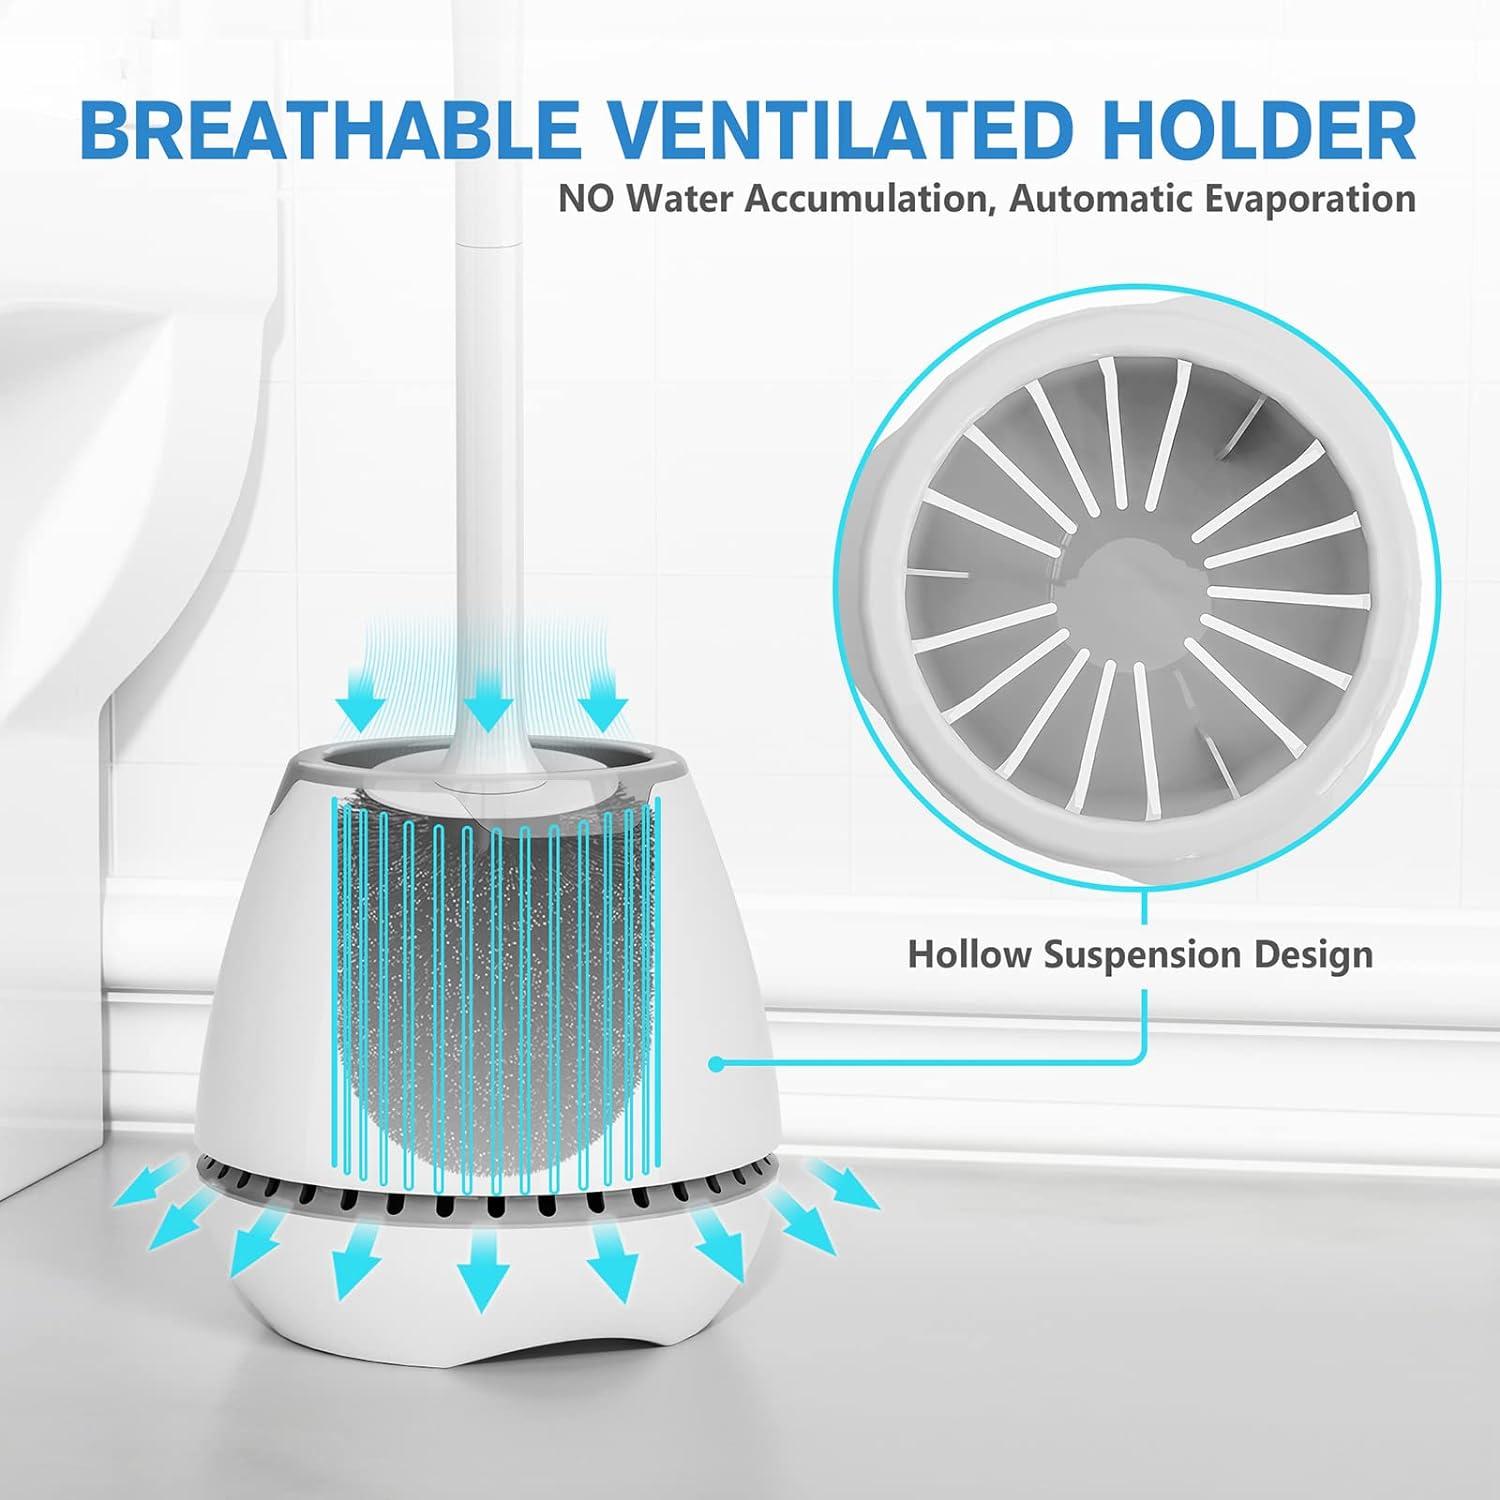 HESAIN Toilet Brush 2 Pack Toilet Bowl Brush and Holder with Ventilated Holder Bathroom Accessories Toilet Bowl Cleaners with Silicone Bristles Cleani